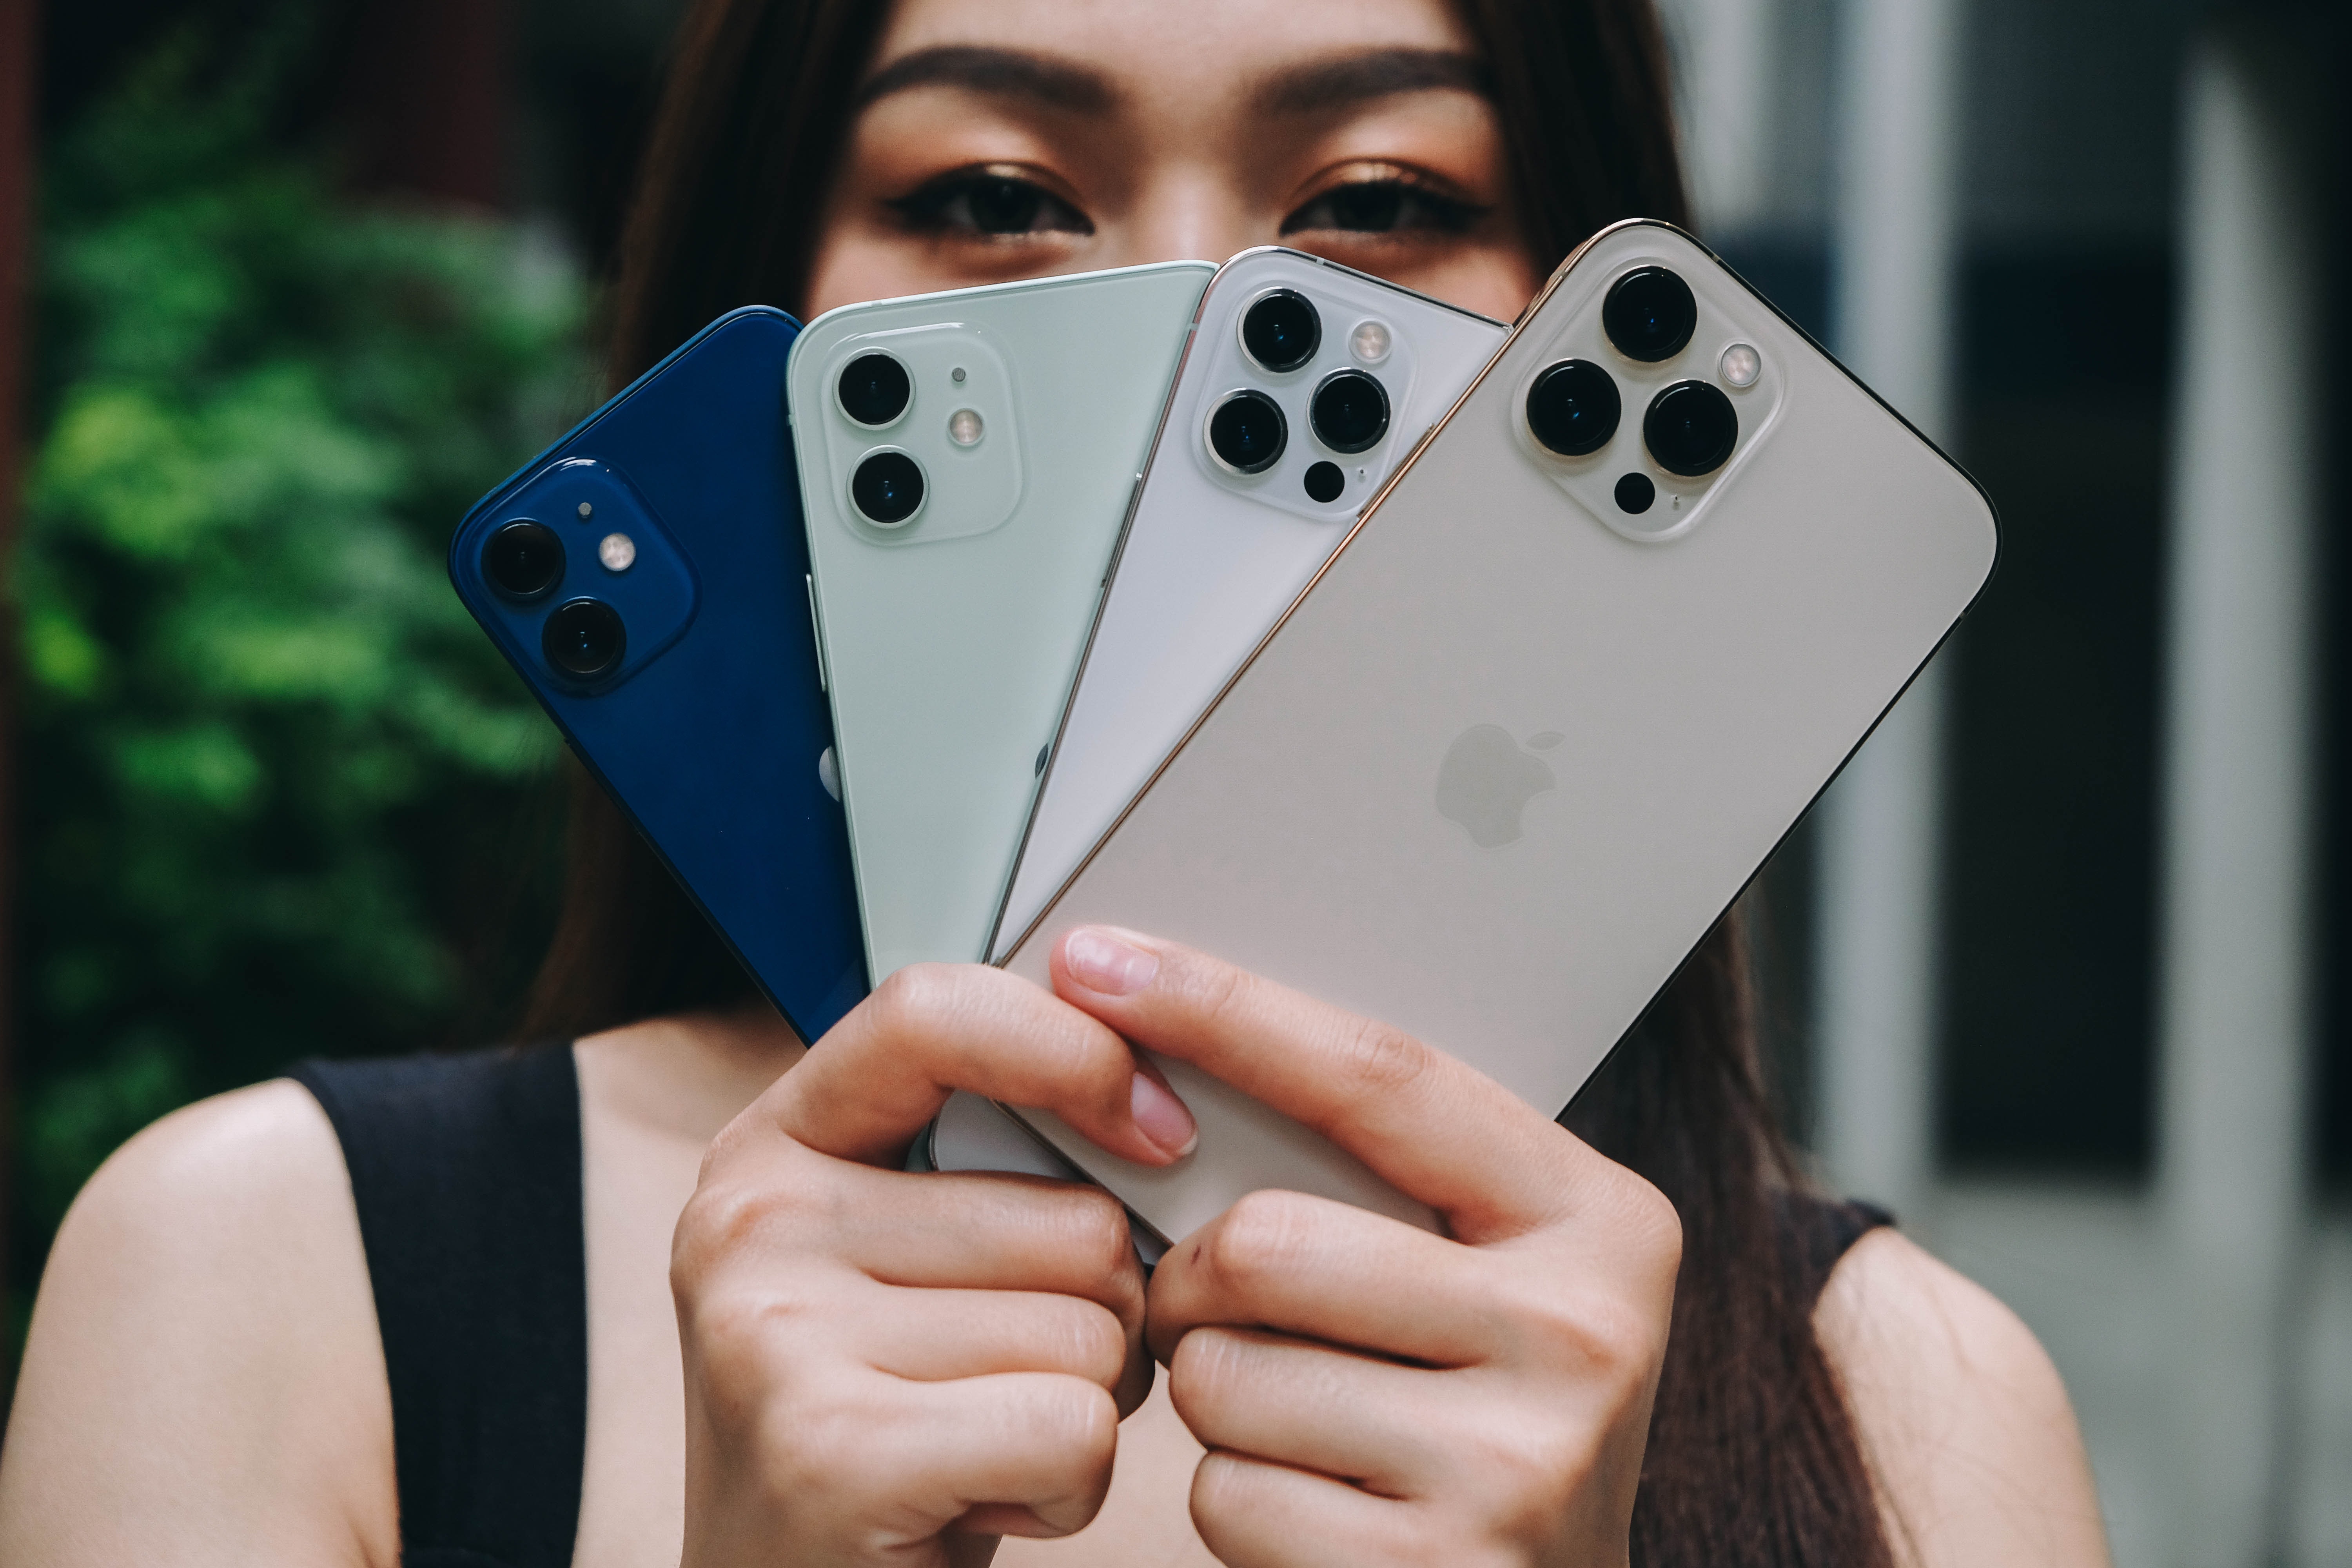 Will China-Taiwan Tensions Upset iPhone 14 Launch? Apple Analyst Weighs In